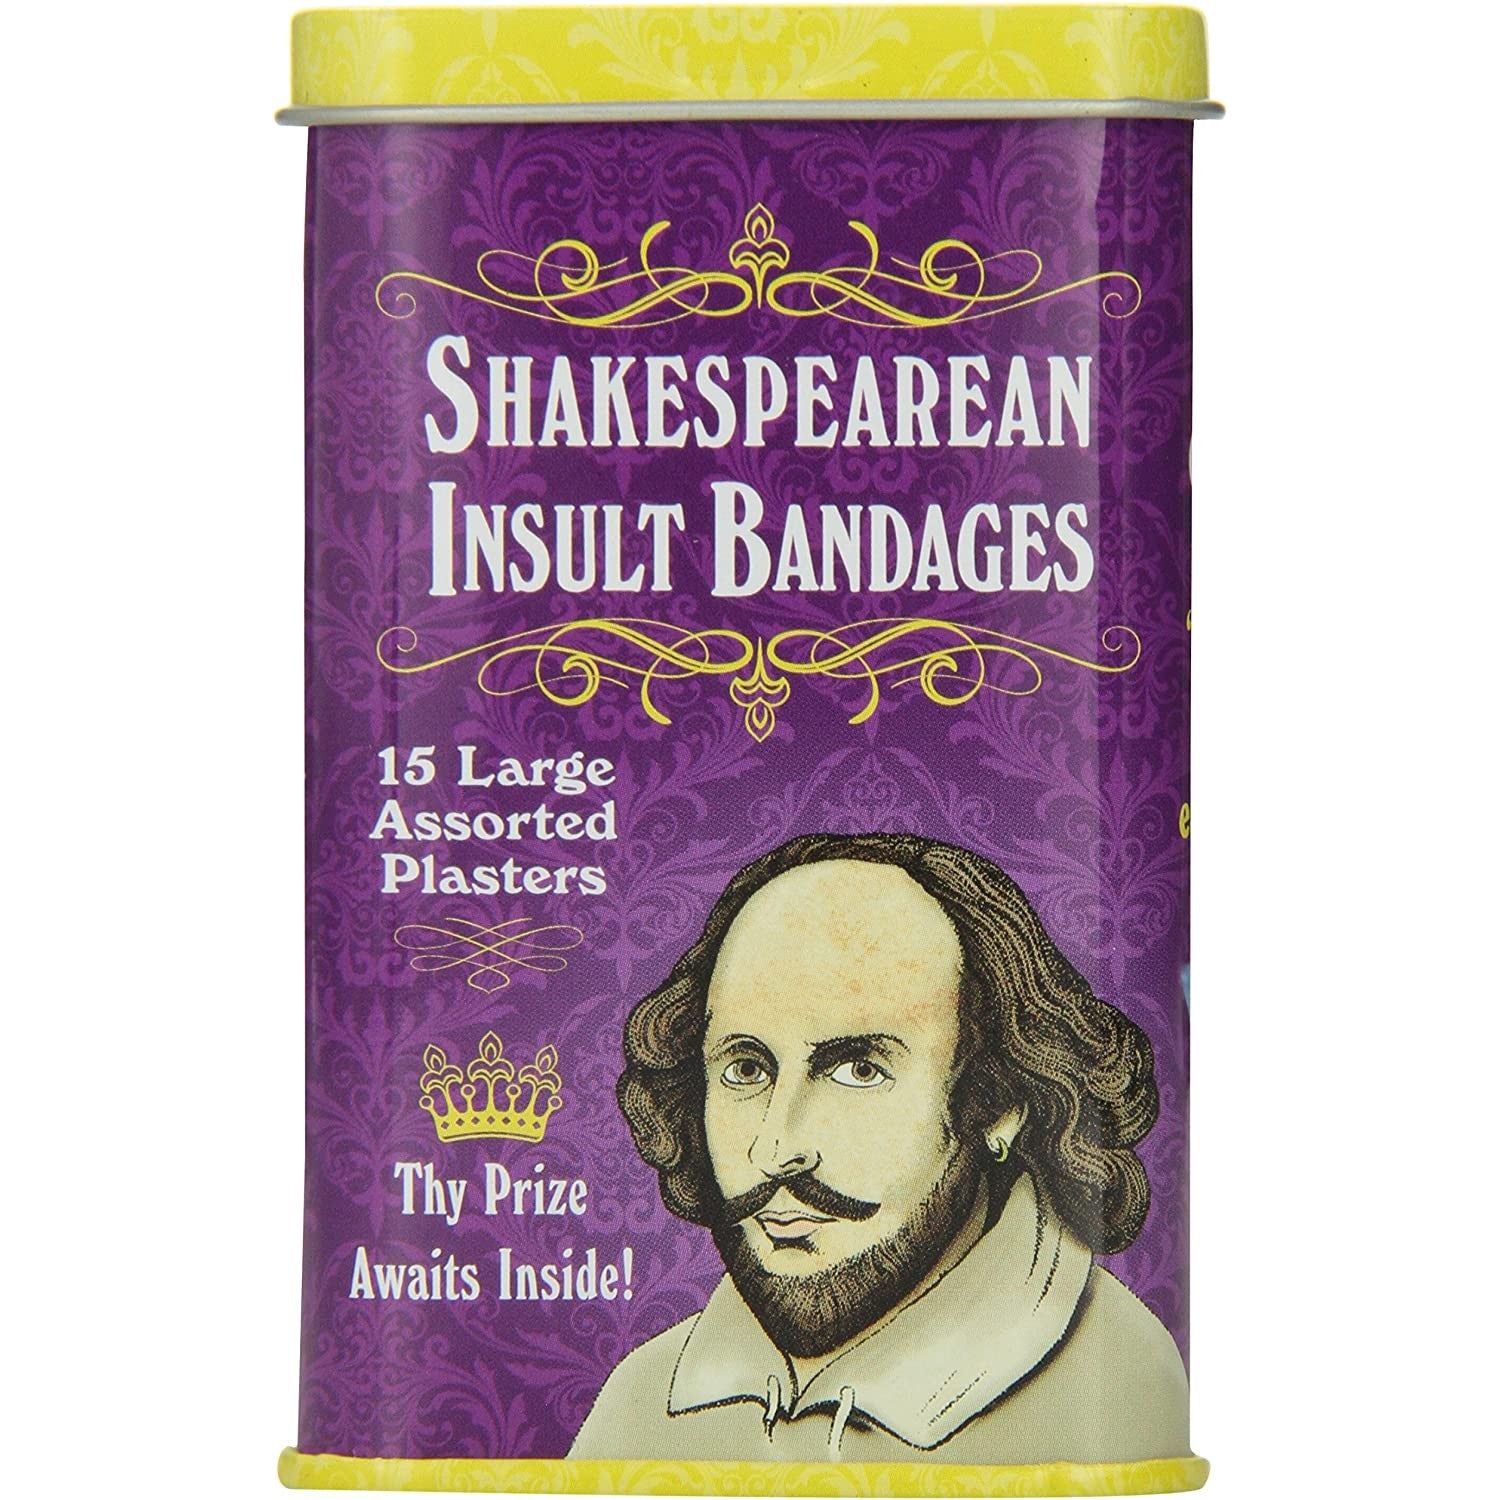 Shakespearean insult bandages in a purple colored metal tin. The text reads, 'Shakespearean insult bandages 15 large assorted plasters. Thy prize awaits inside!'